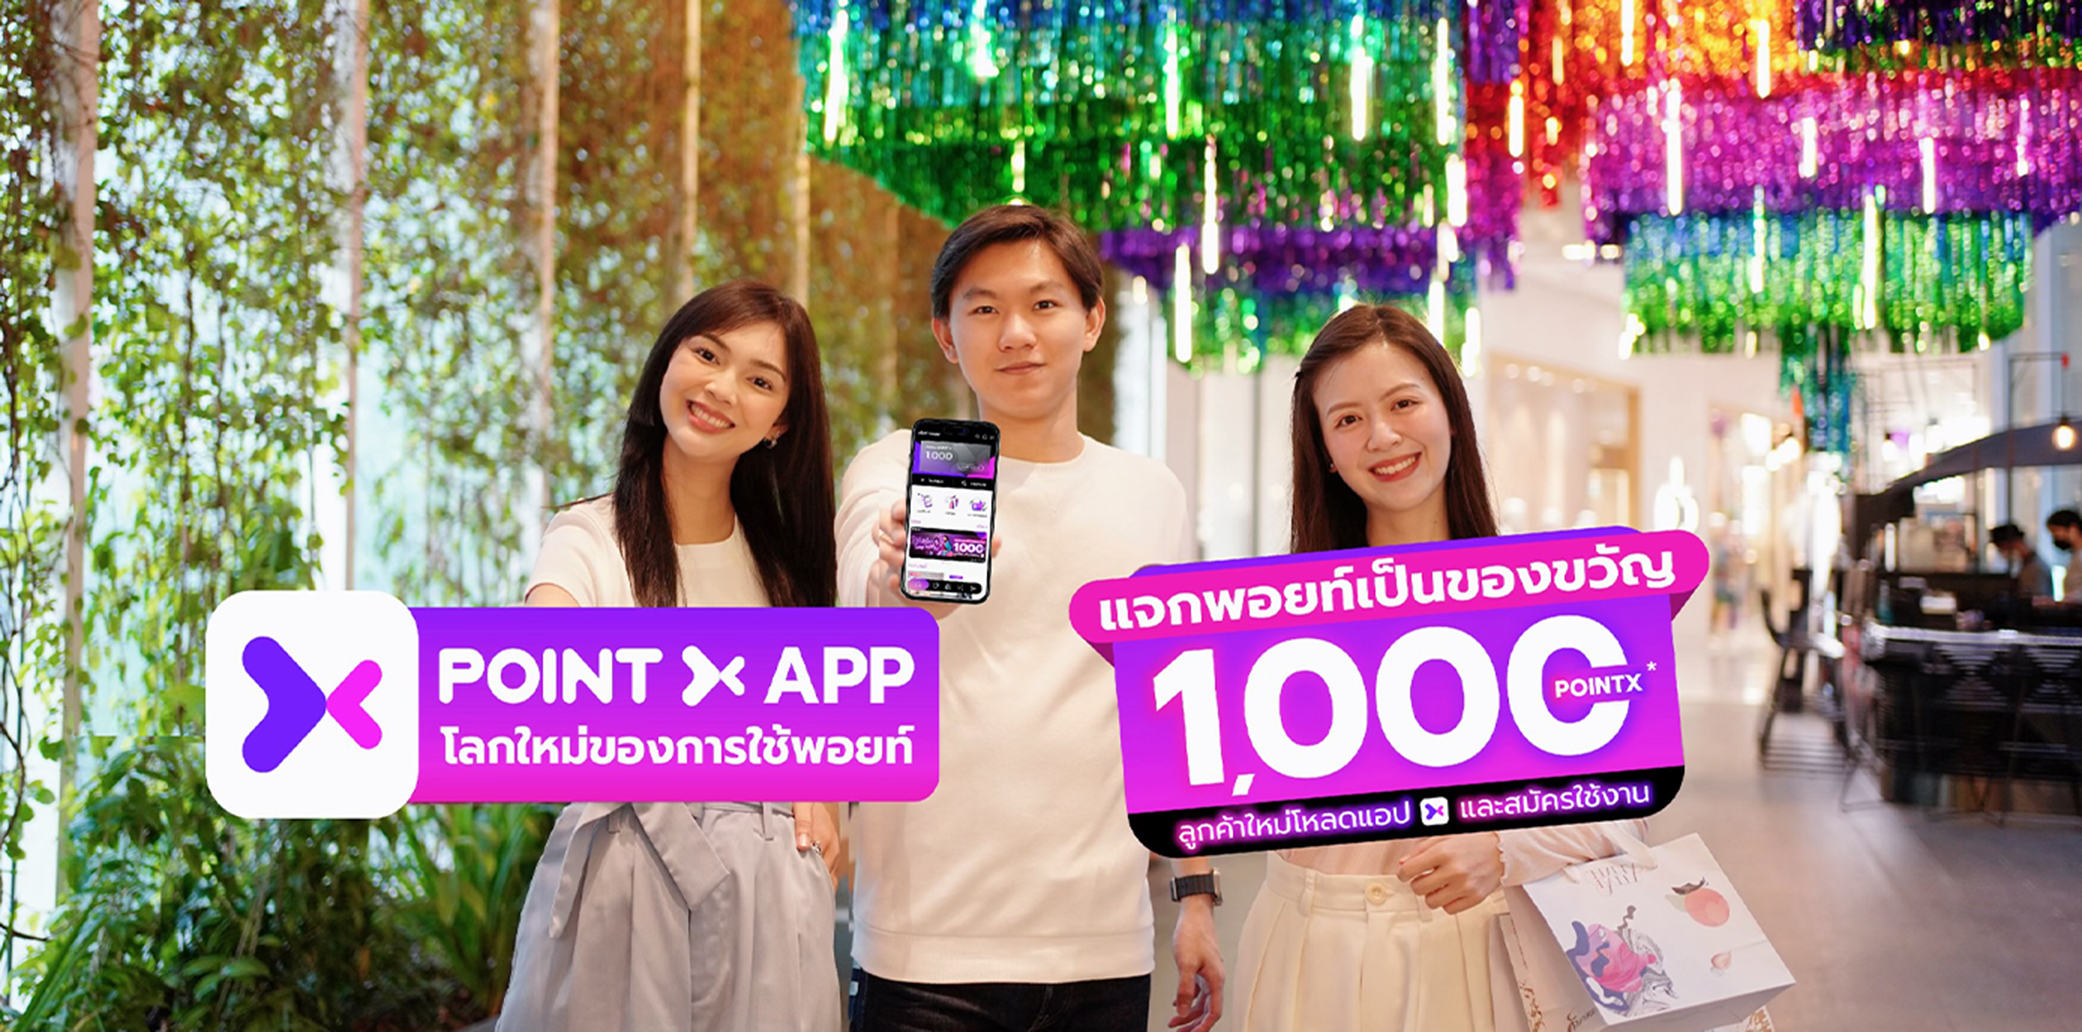 Celebrate the festive season with the PointX giveaway for new users:Get 1,000 PointX for free when downloading the app and registering as a user from now until 31 December 2023